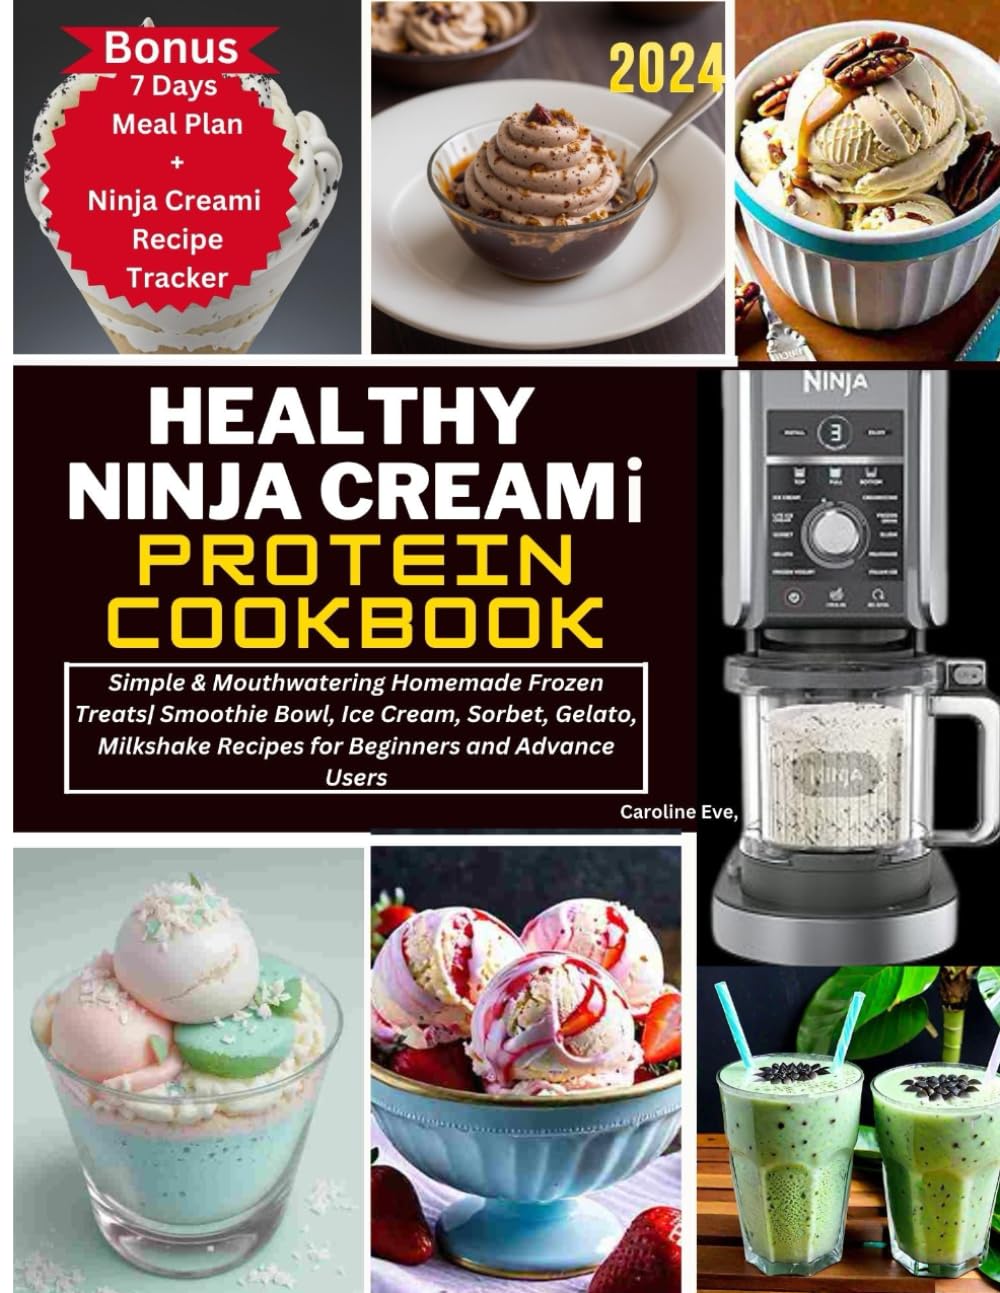 HEALTHY NINJA CREAMi PROTEIN COOKBOOK: Simple & Mouthwatering Homemade Frozen Treats| Smoothie Bowl, Ice Cream, Sorbet, Gelato, Milkshake Recipes for Beginners and Advance Users